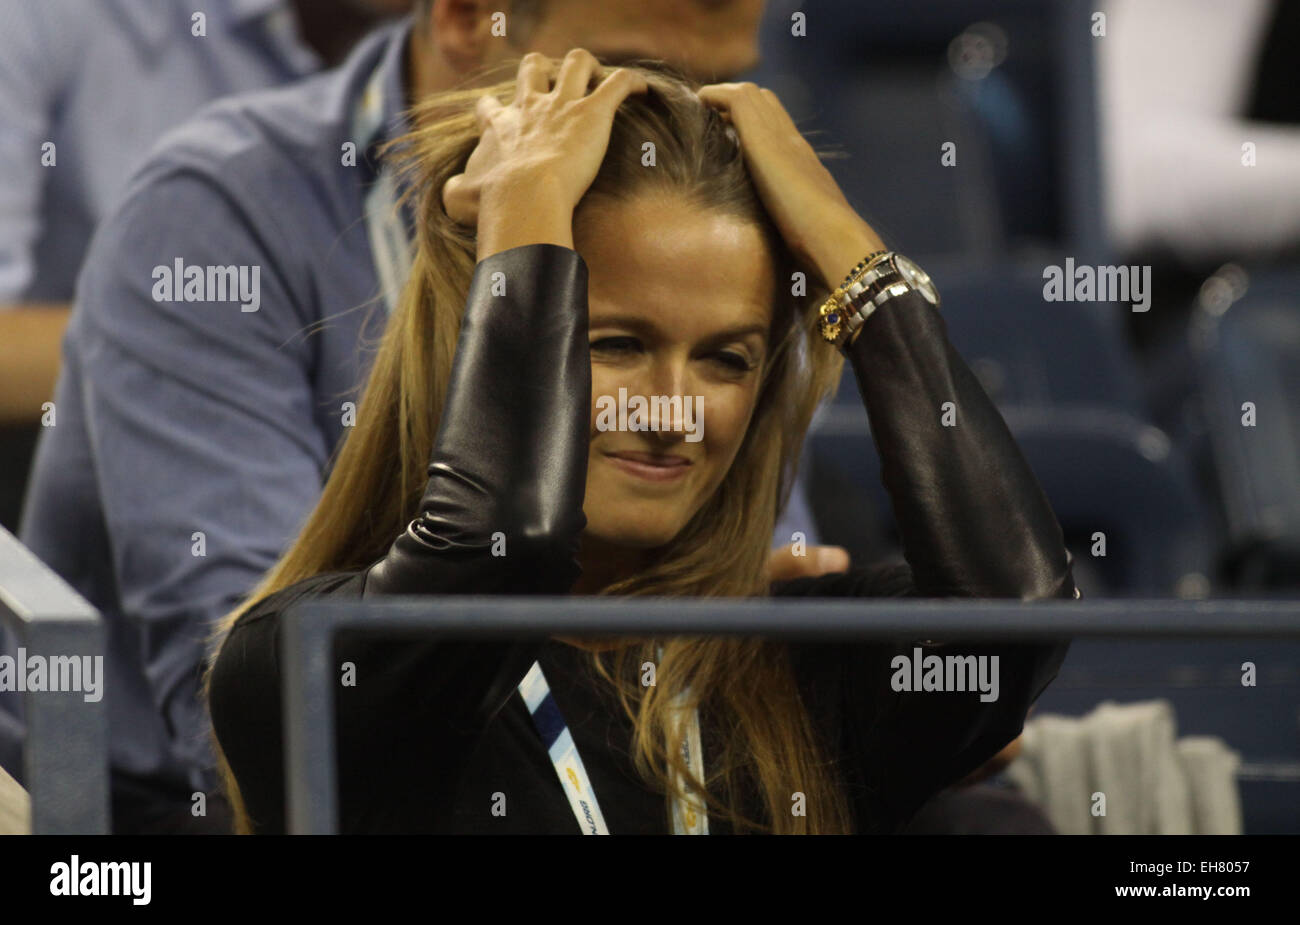 2014 US Open Tennis Championships - Day 10 - Celebrity Sightings Featuring: Kim Sears Where: New York City, New York, United States When: 03 Sep 2014 Stock Photo